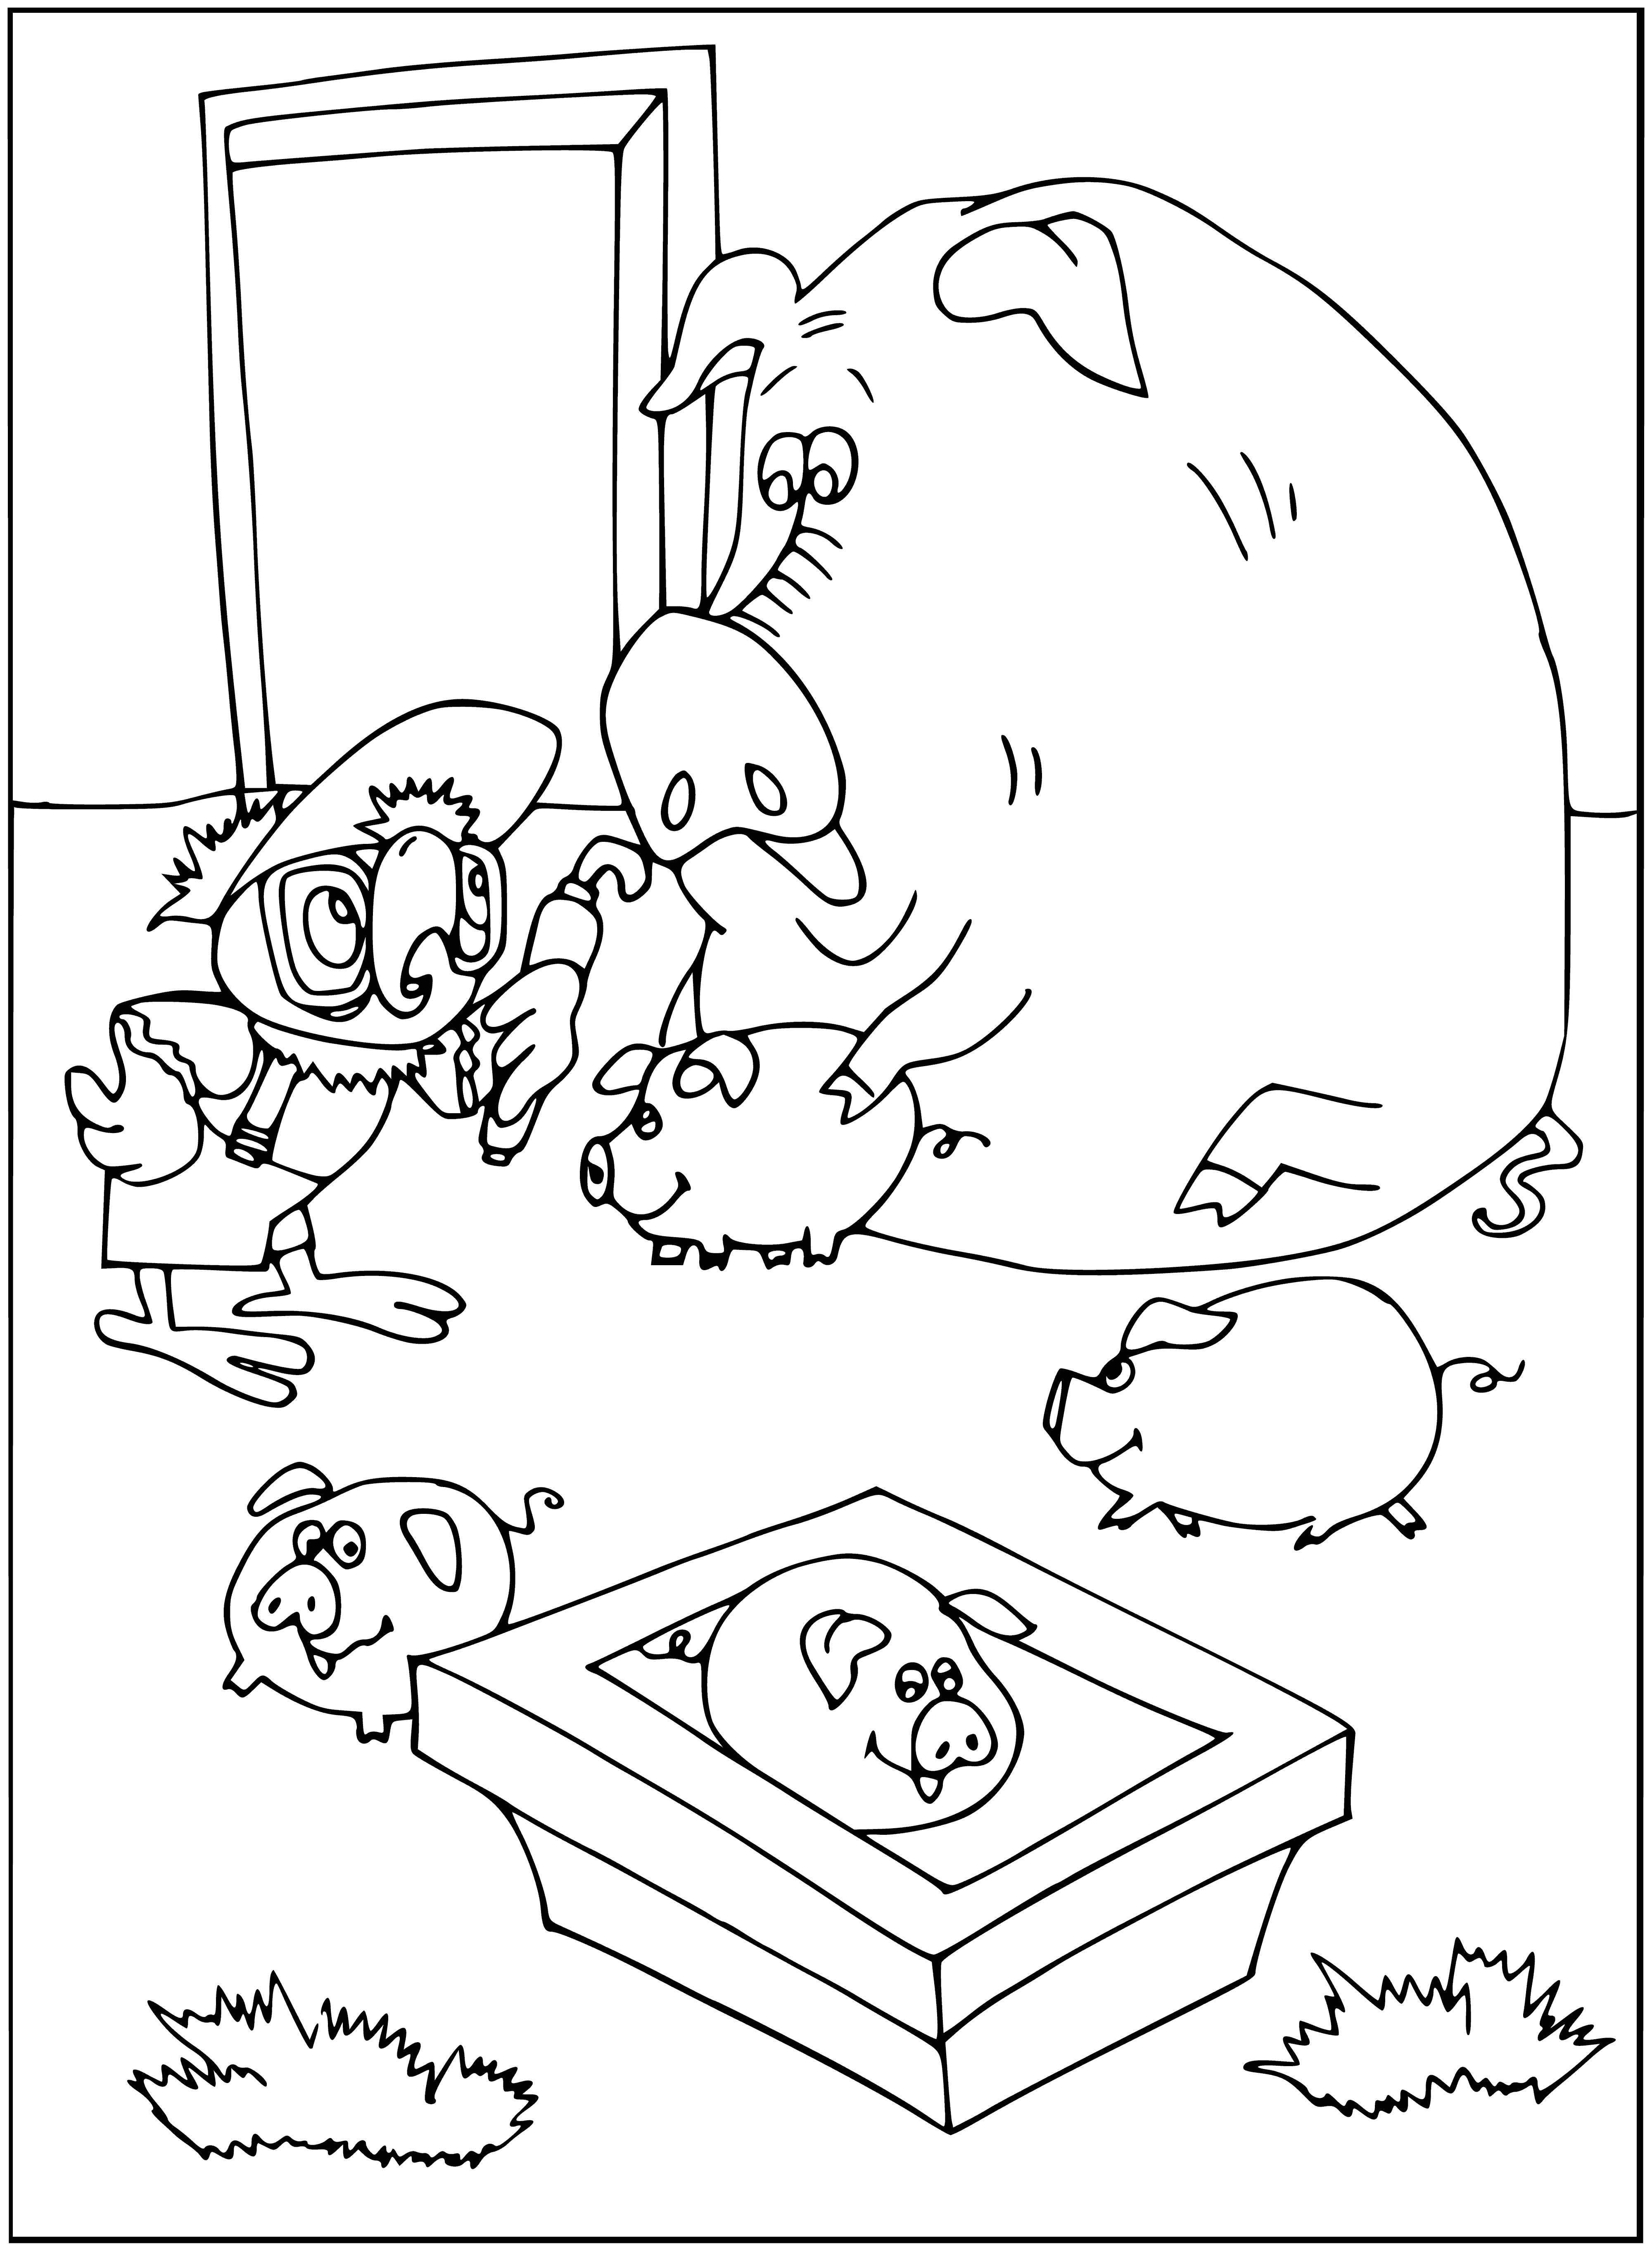 coloring page: Farmhouse in center, barn left, 3 sheep, chicken coop right & mountains in the distance – a peaceful country scene. #coloringpages